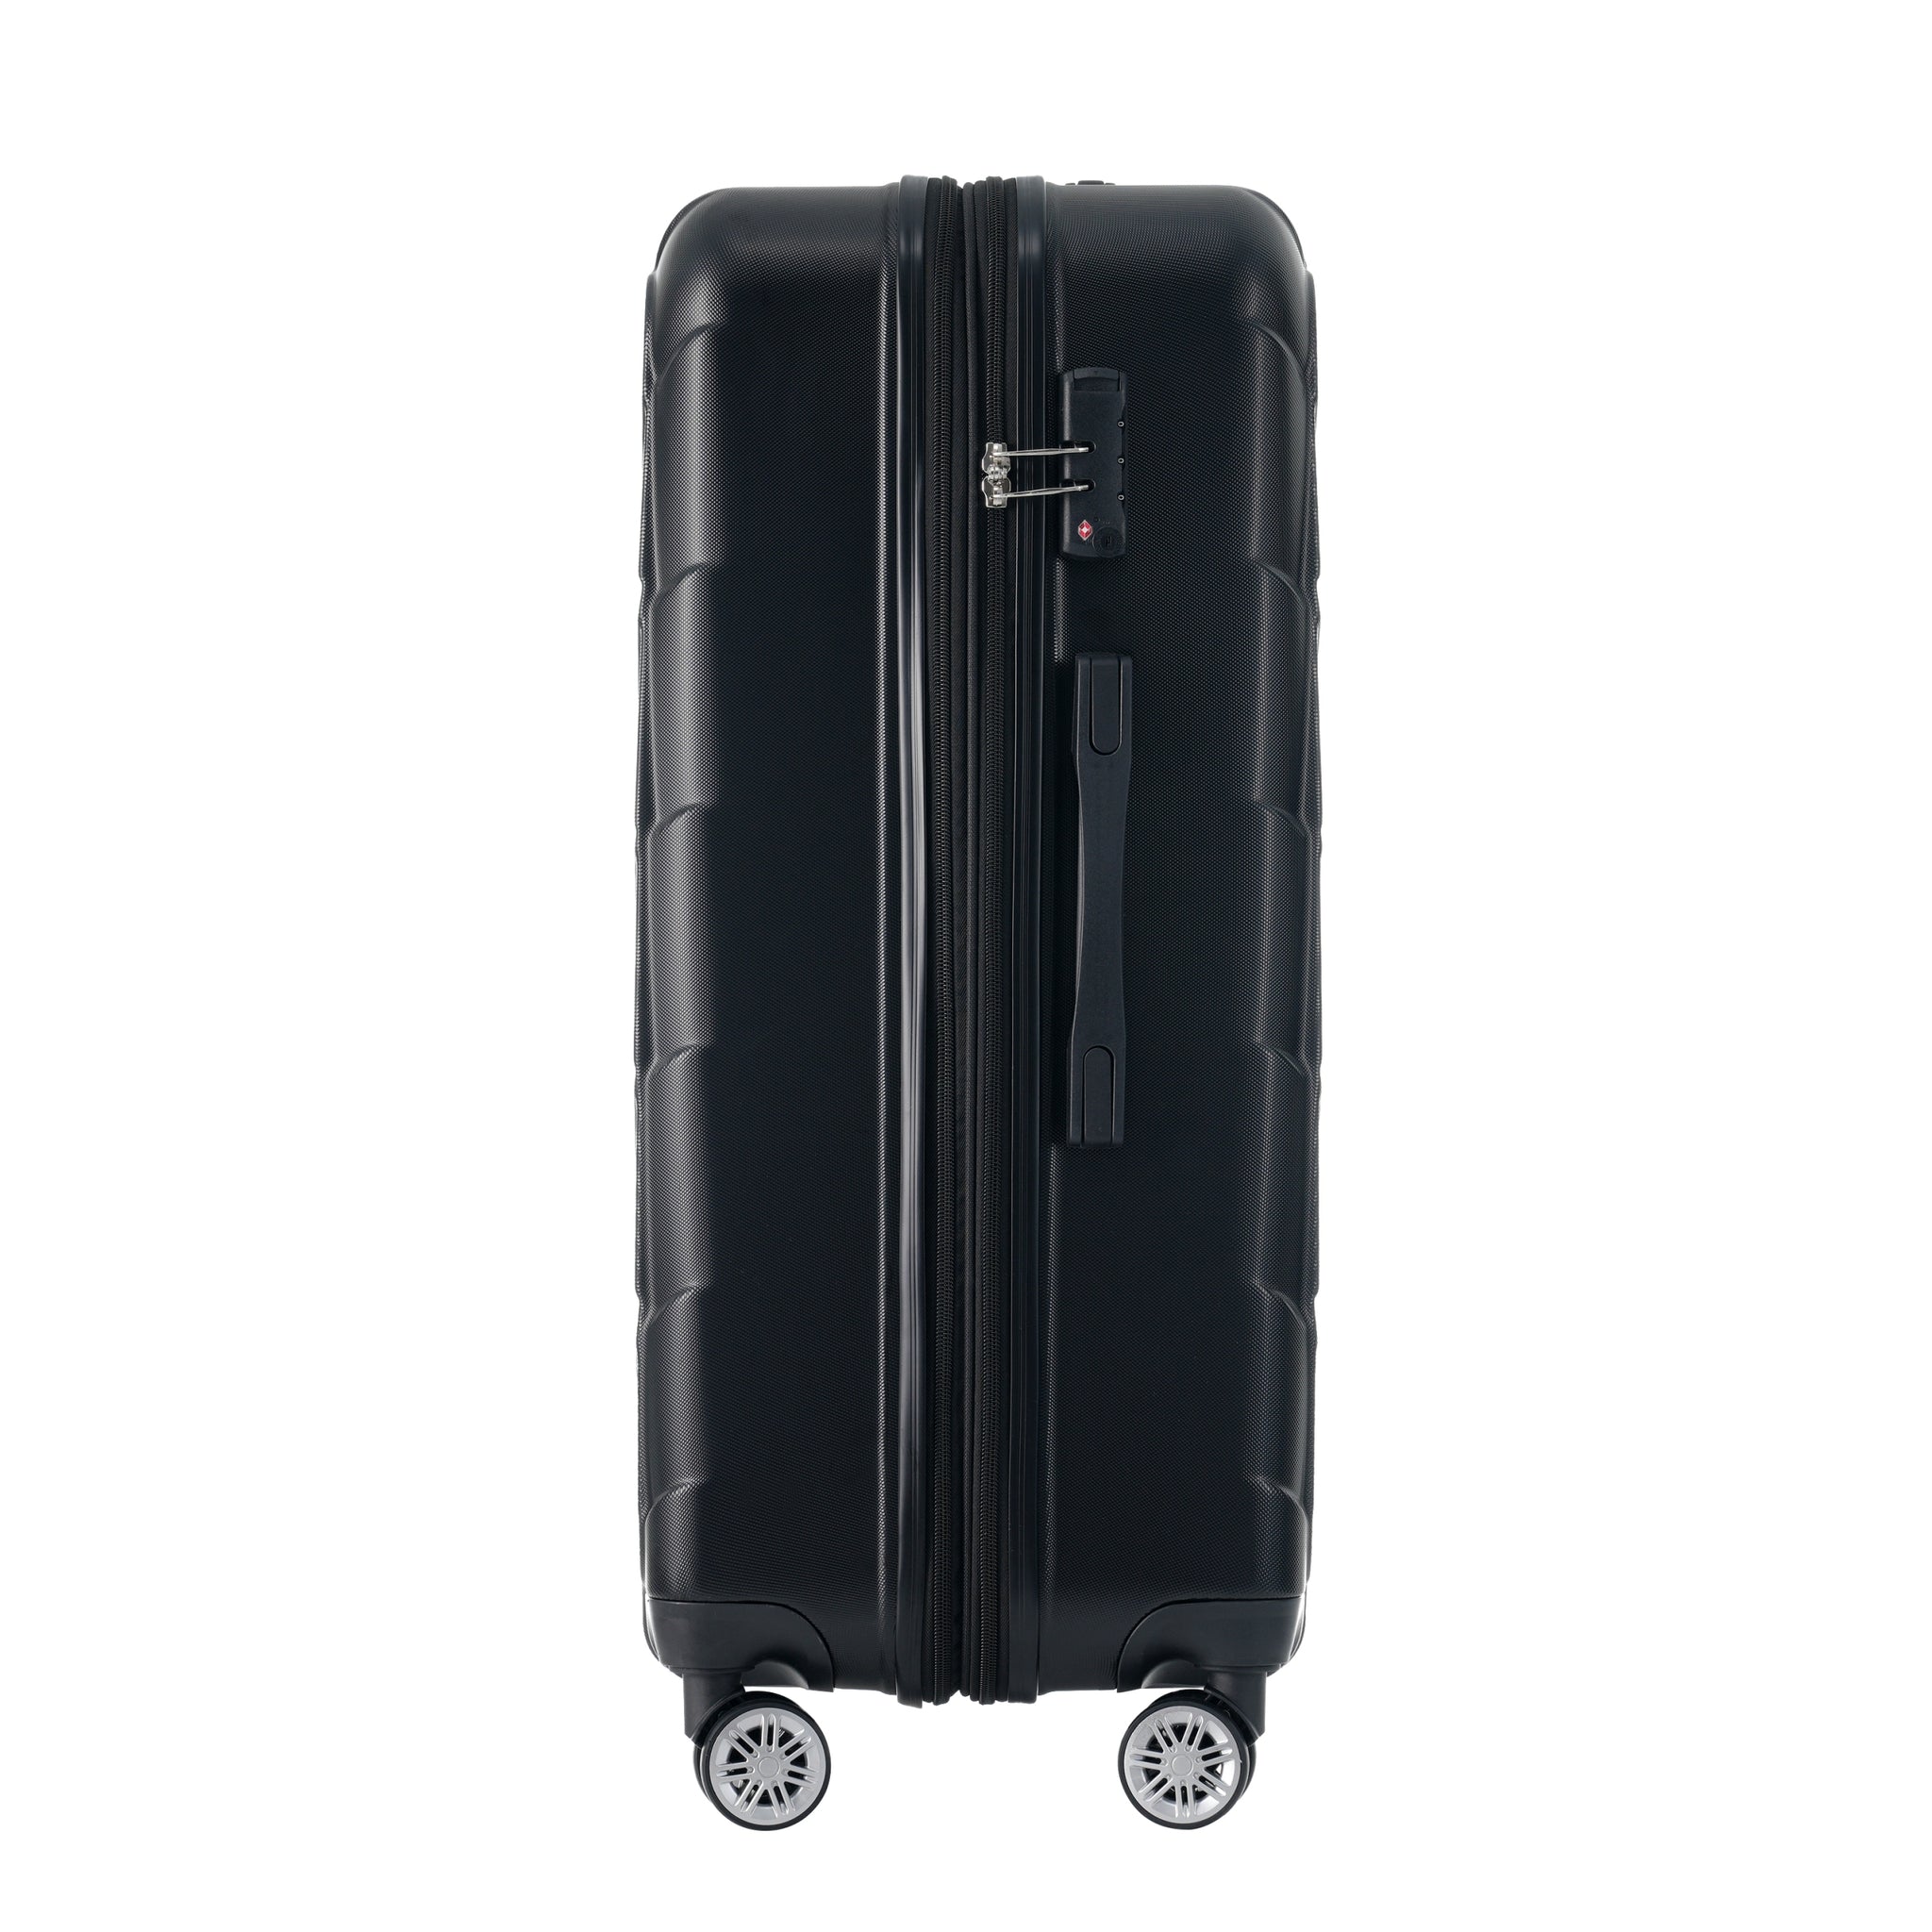 3 Piece Luggage Set Suitcase Set, ABS Hard Shell black-abs